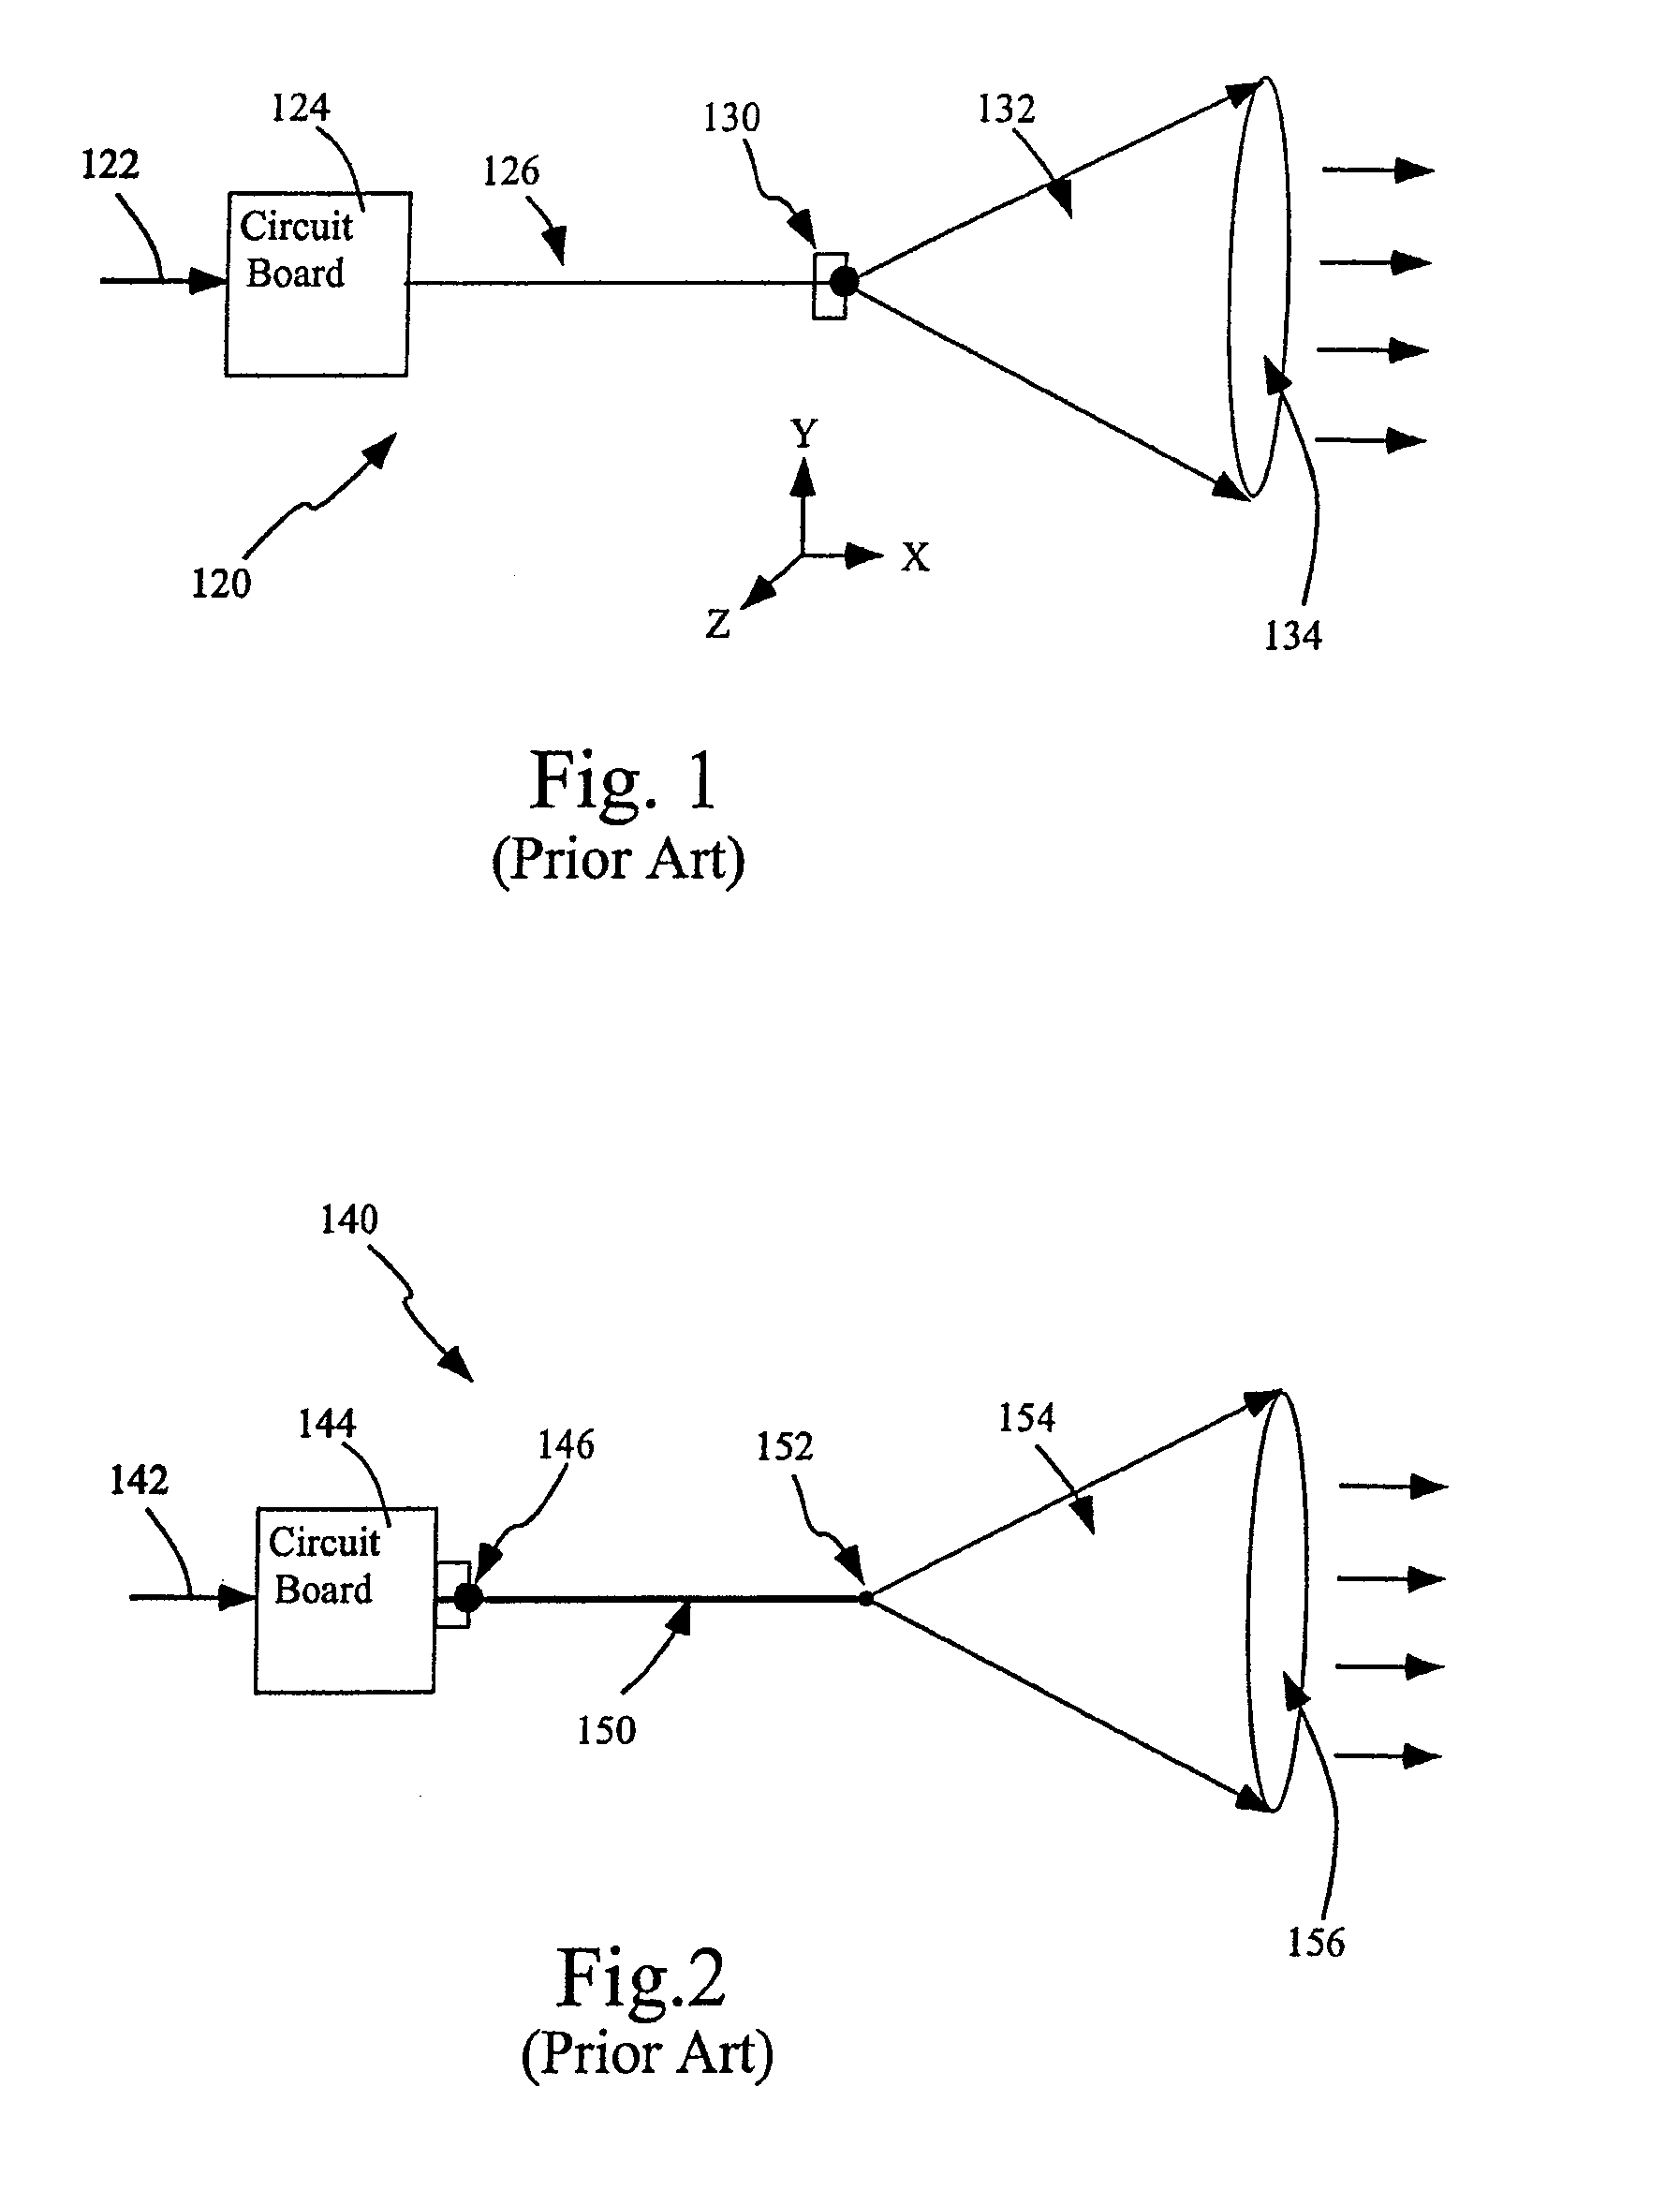 Apparatus and method for use in free-space optical communication comprising optically aligned components integrated on circuit boards